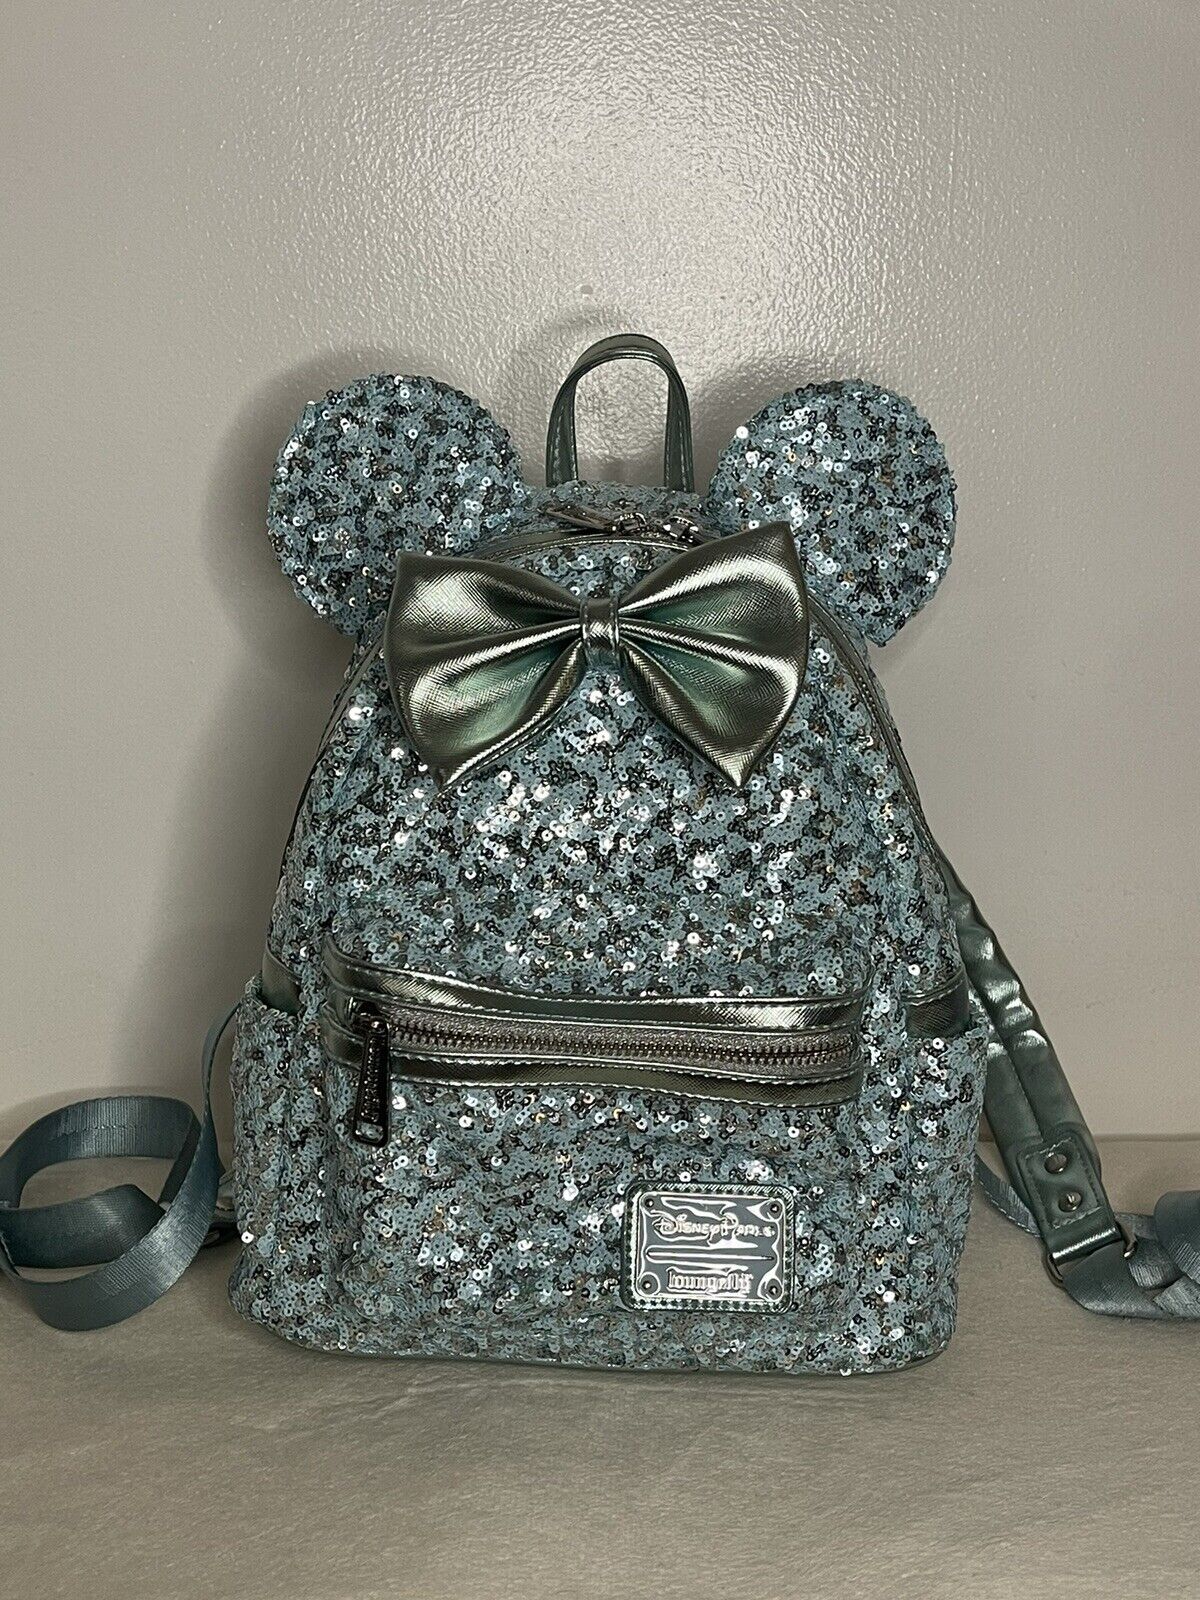 Disney Arendelle Aqua Blue Loungefly Minnie Mouse Frozen Sequin Backpack/Ears